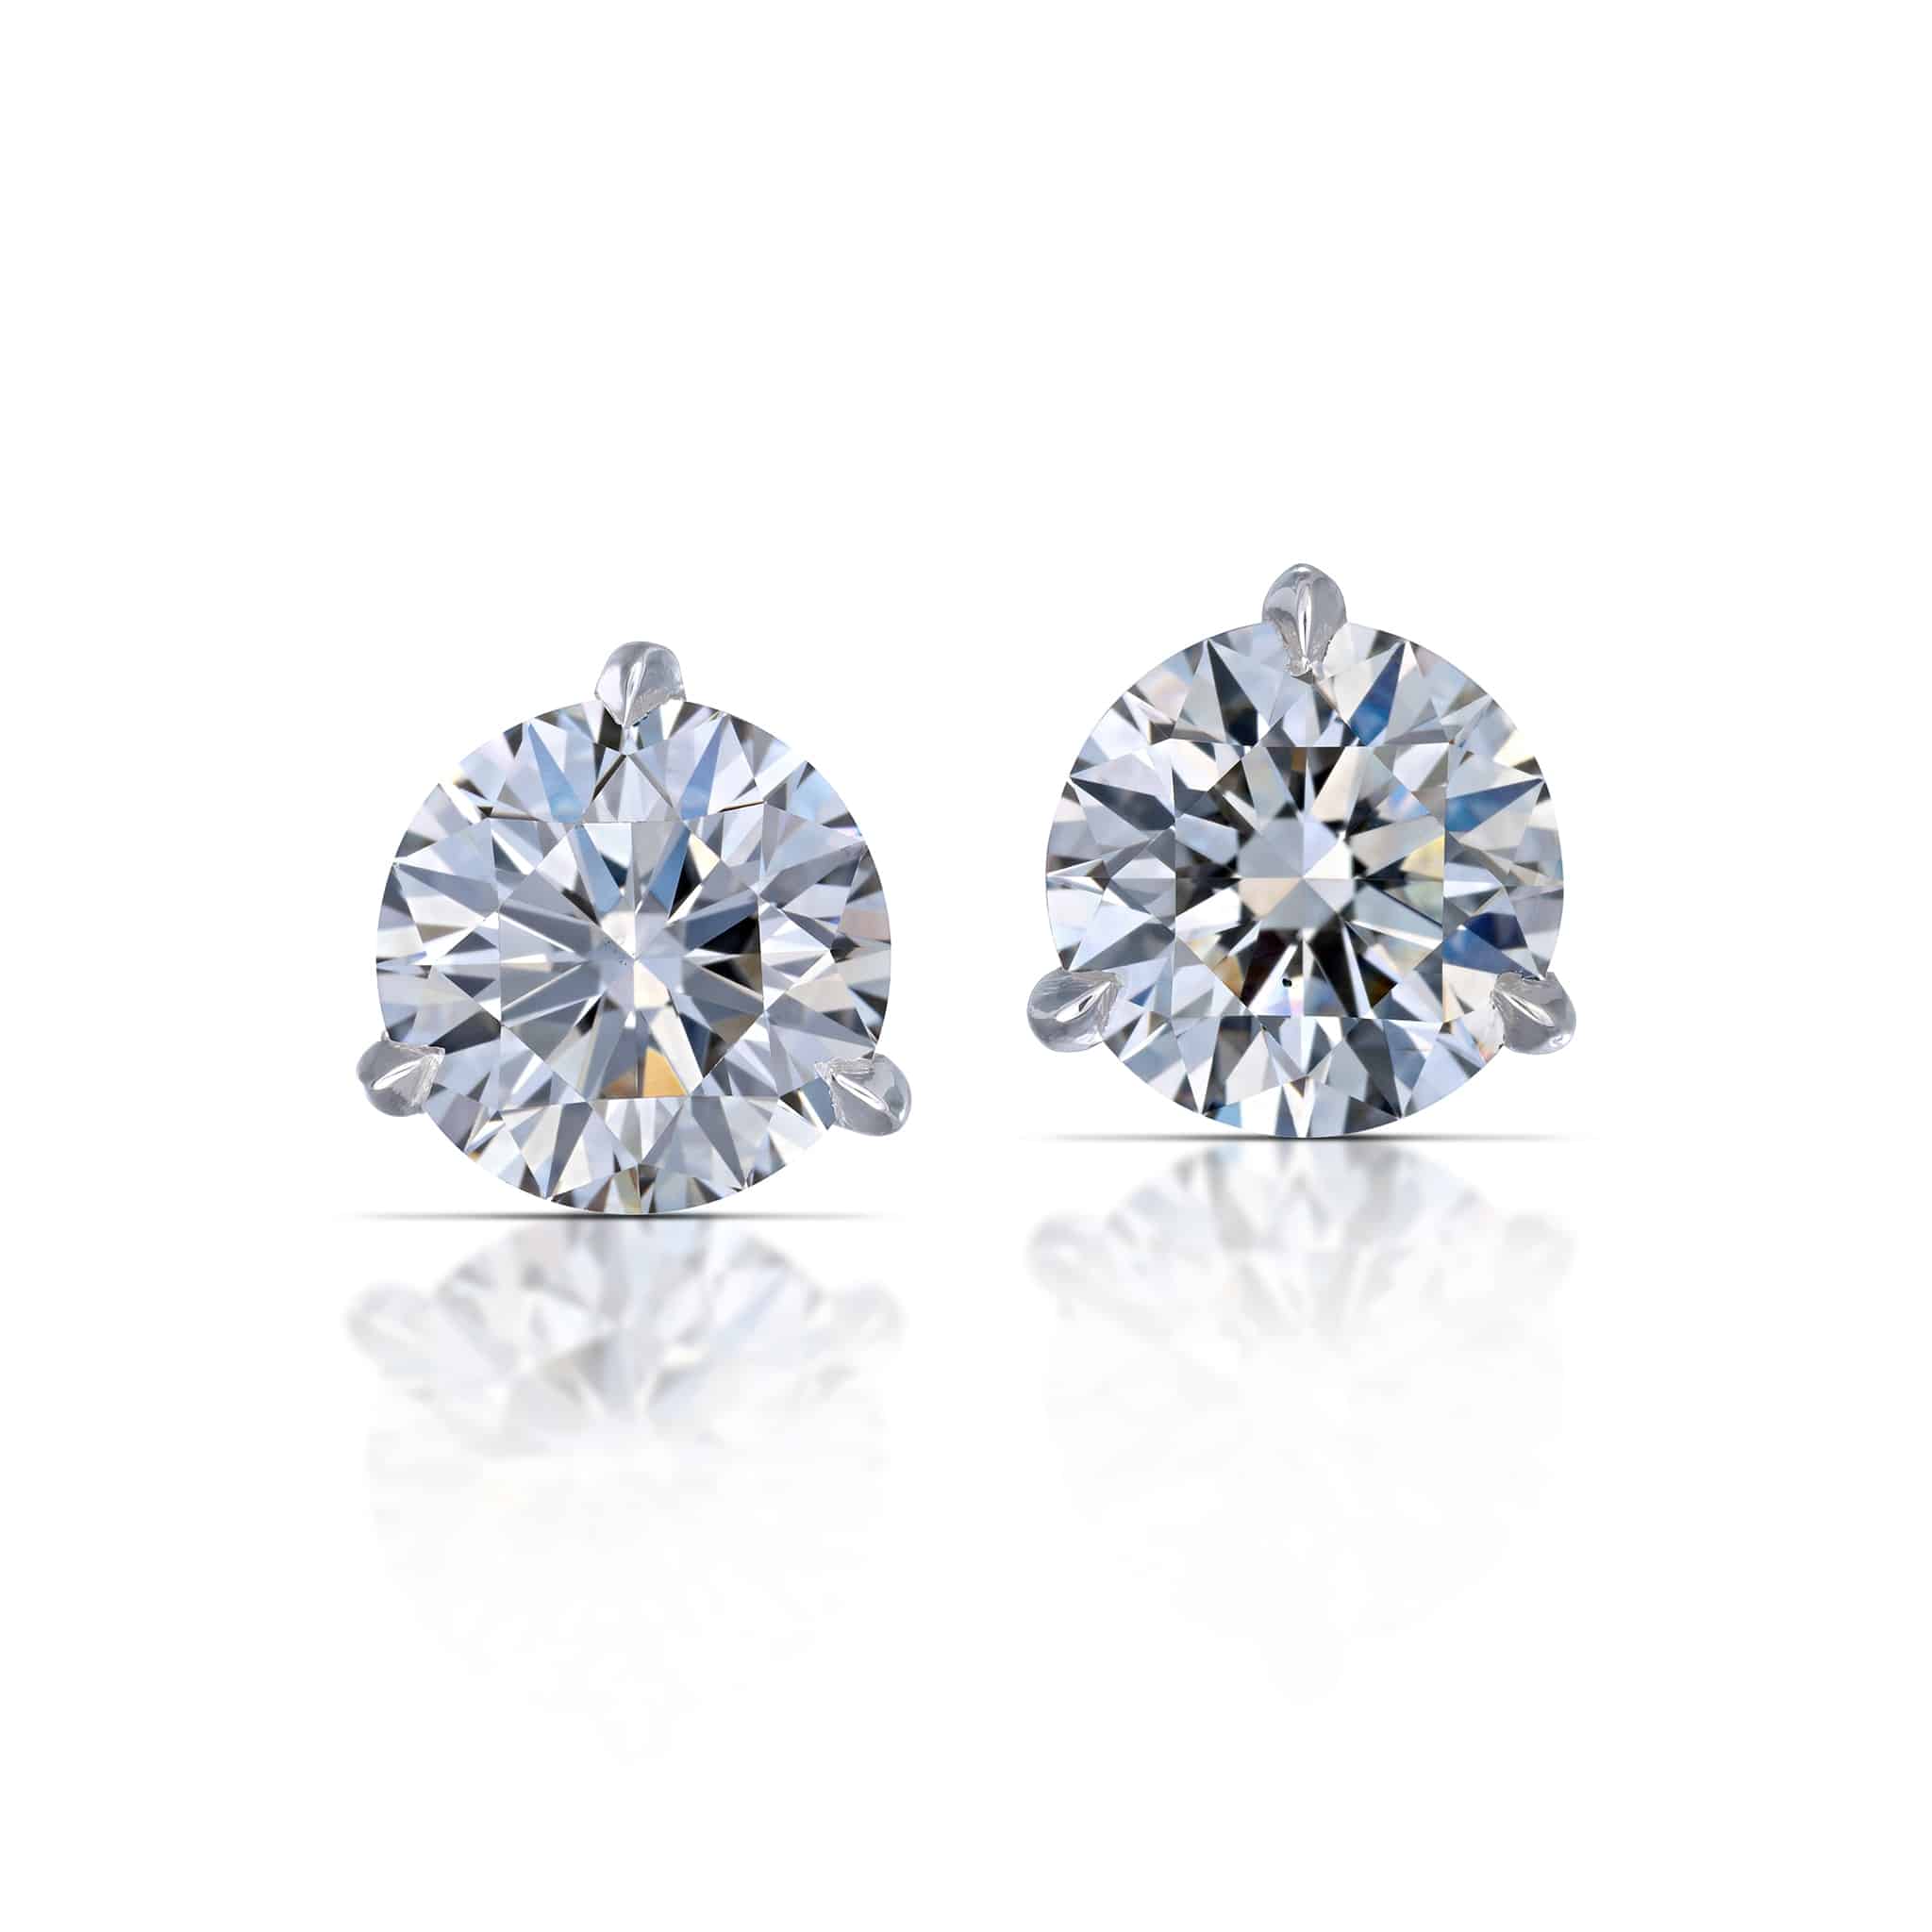 Get the Perfect Kids' 950 Platinum Earrings | GLAMIRA.in